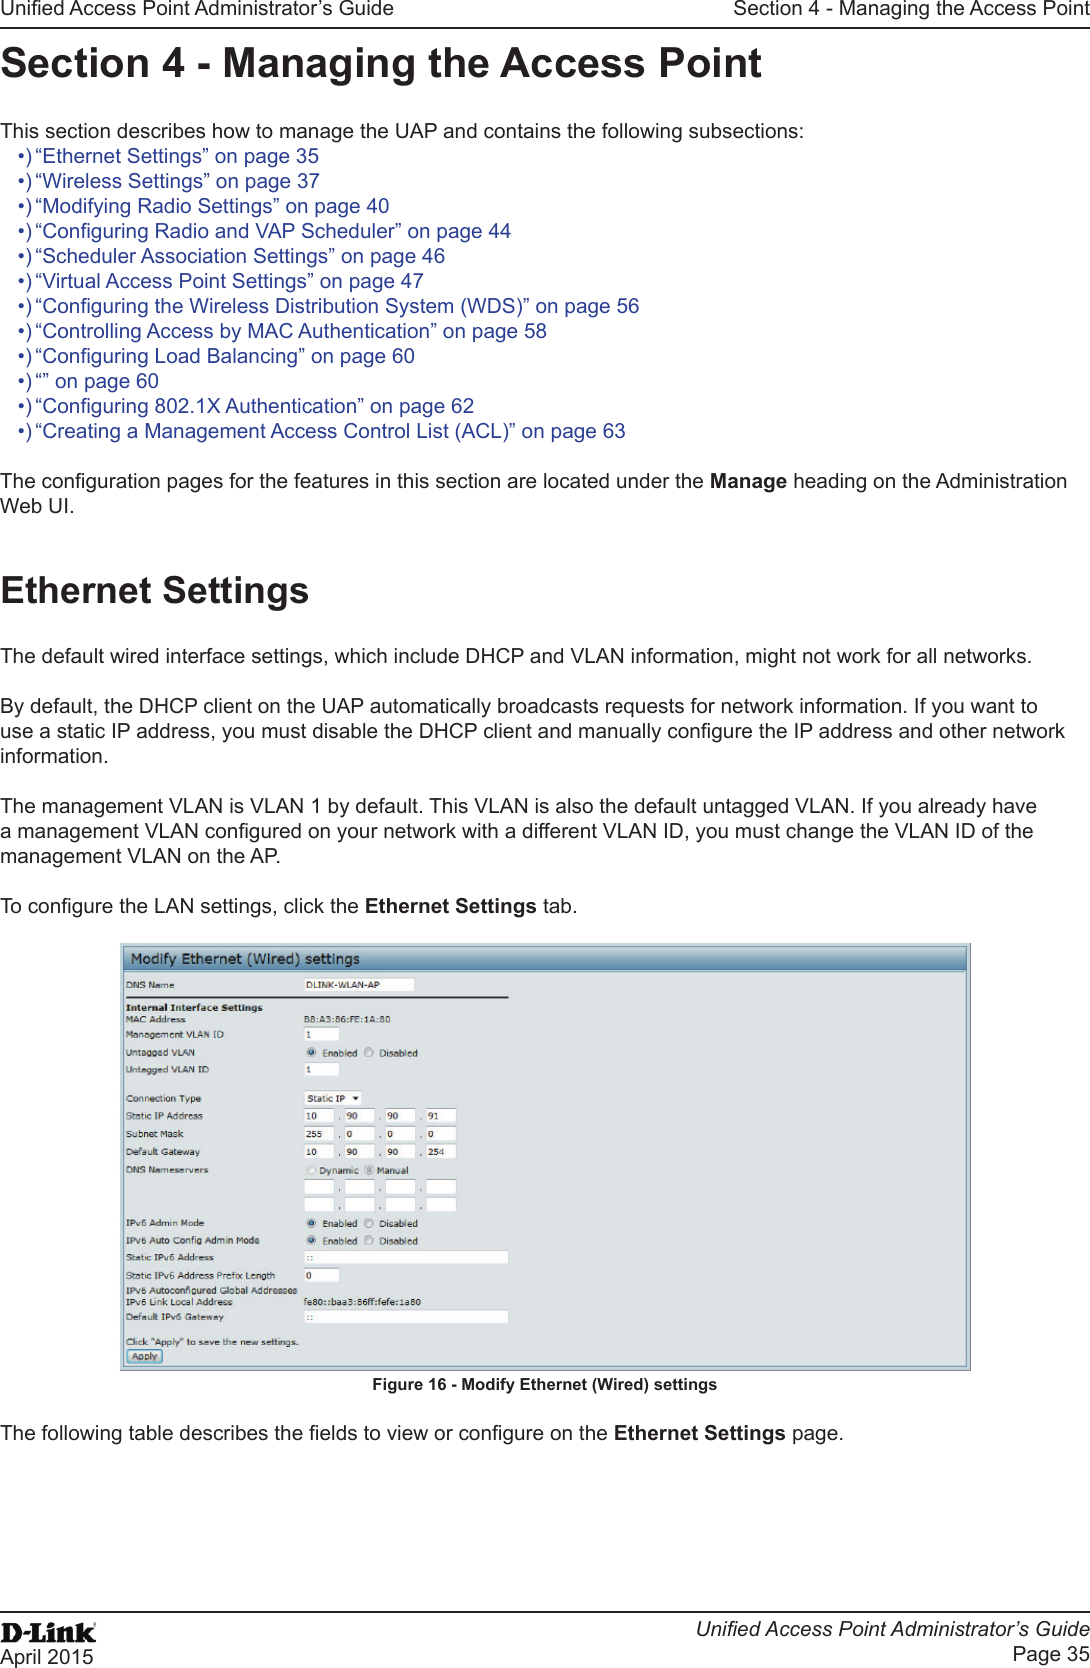 Unied Access Point Administrator’s GuideUnied Access Point Administrator’s GuidePage 35April 2015Section 4 - Managing the Access PointSection 4 - Managing the Access PointThis section describes how to manage the UAP and contains the following subsections:•) “Ethernet Settings” on page 35•) “Wireless Settings” on page 37•) “Modifying Radio Settings” on page 40•) “Conguring Radio and VAP Scheduler” on page 44•) “Scheduler Association Settings” on page 46•) “Virtual Access Point Settings” on page 47•) “Conguring the Wireless Distribution System (WDS)” on page 56•) “Controlling Access by MAC Authentication” on page 58•) “Conguring Load Balancing” on page 60•) “” on page 60•) “Conguring 802.1X Authentication” on page 62•) “Creating a Management Access Control List (ACL)” on page 63The conguration pages for the features in this section are located under the Manage heading on the Administration Web UI.Ethernet SettingsThe default wired interface settings, which include DHCP and VLAN information, might not work for all networks. By default, the DHCP client on the UAP automatically broadcasts requests for network information. If you want to use a static IP address, you must disable the DHCP client and manually congure the IP address and other network information.The management VLAN is VLAN 1 by default. This VLAN is also the default untagged VLAN. If you already have a management VLAN congured on your network with a different VLAN ID, you must change the VLAN ID of the management VLAN on the AP.To congure the LAN settings, click the Ethernet Settings tab.Figure 16 - Modify Ethernet (Wired) settingsThe following table describes the elds to view or congure on the Ethernet Settings page.